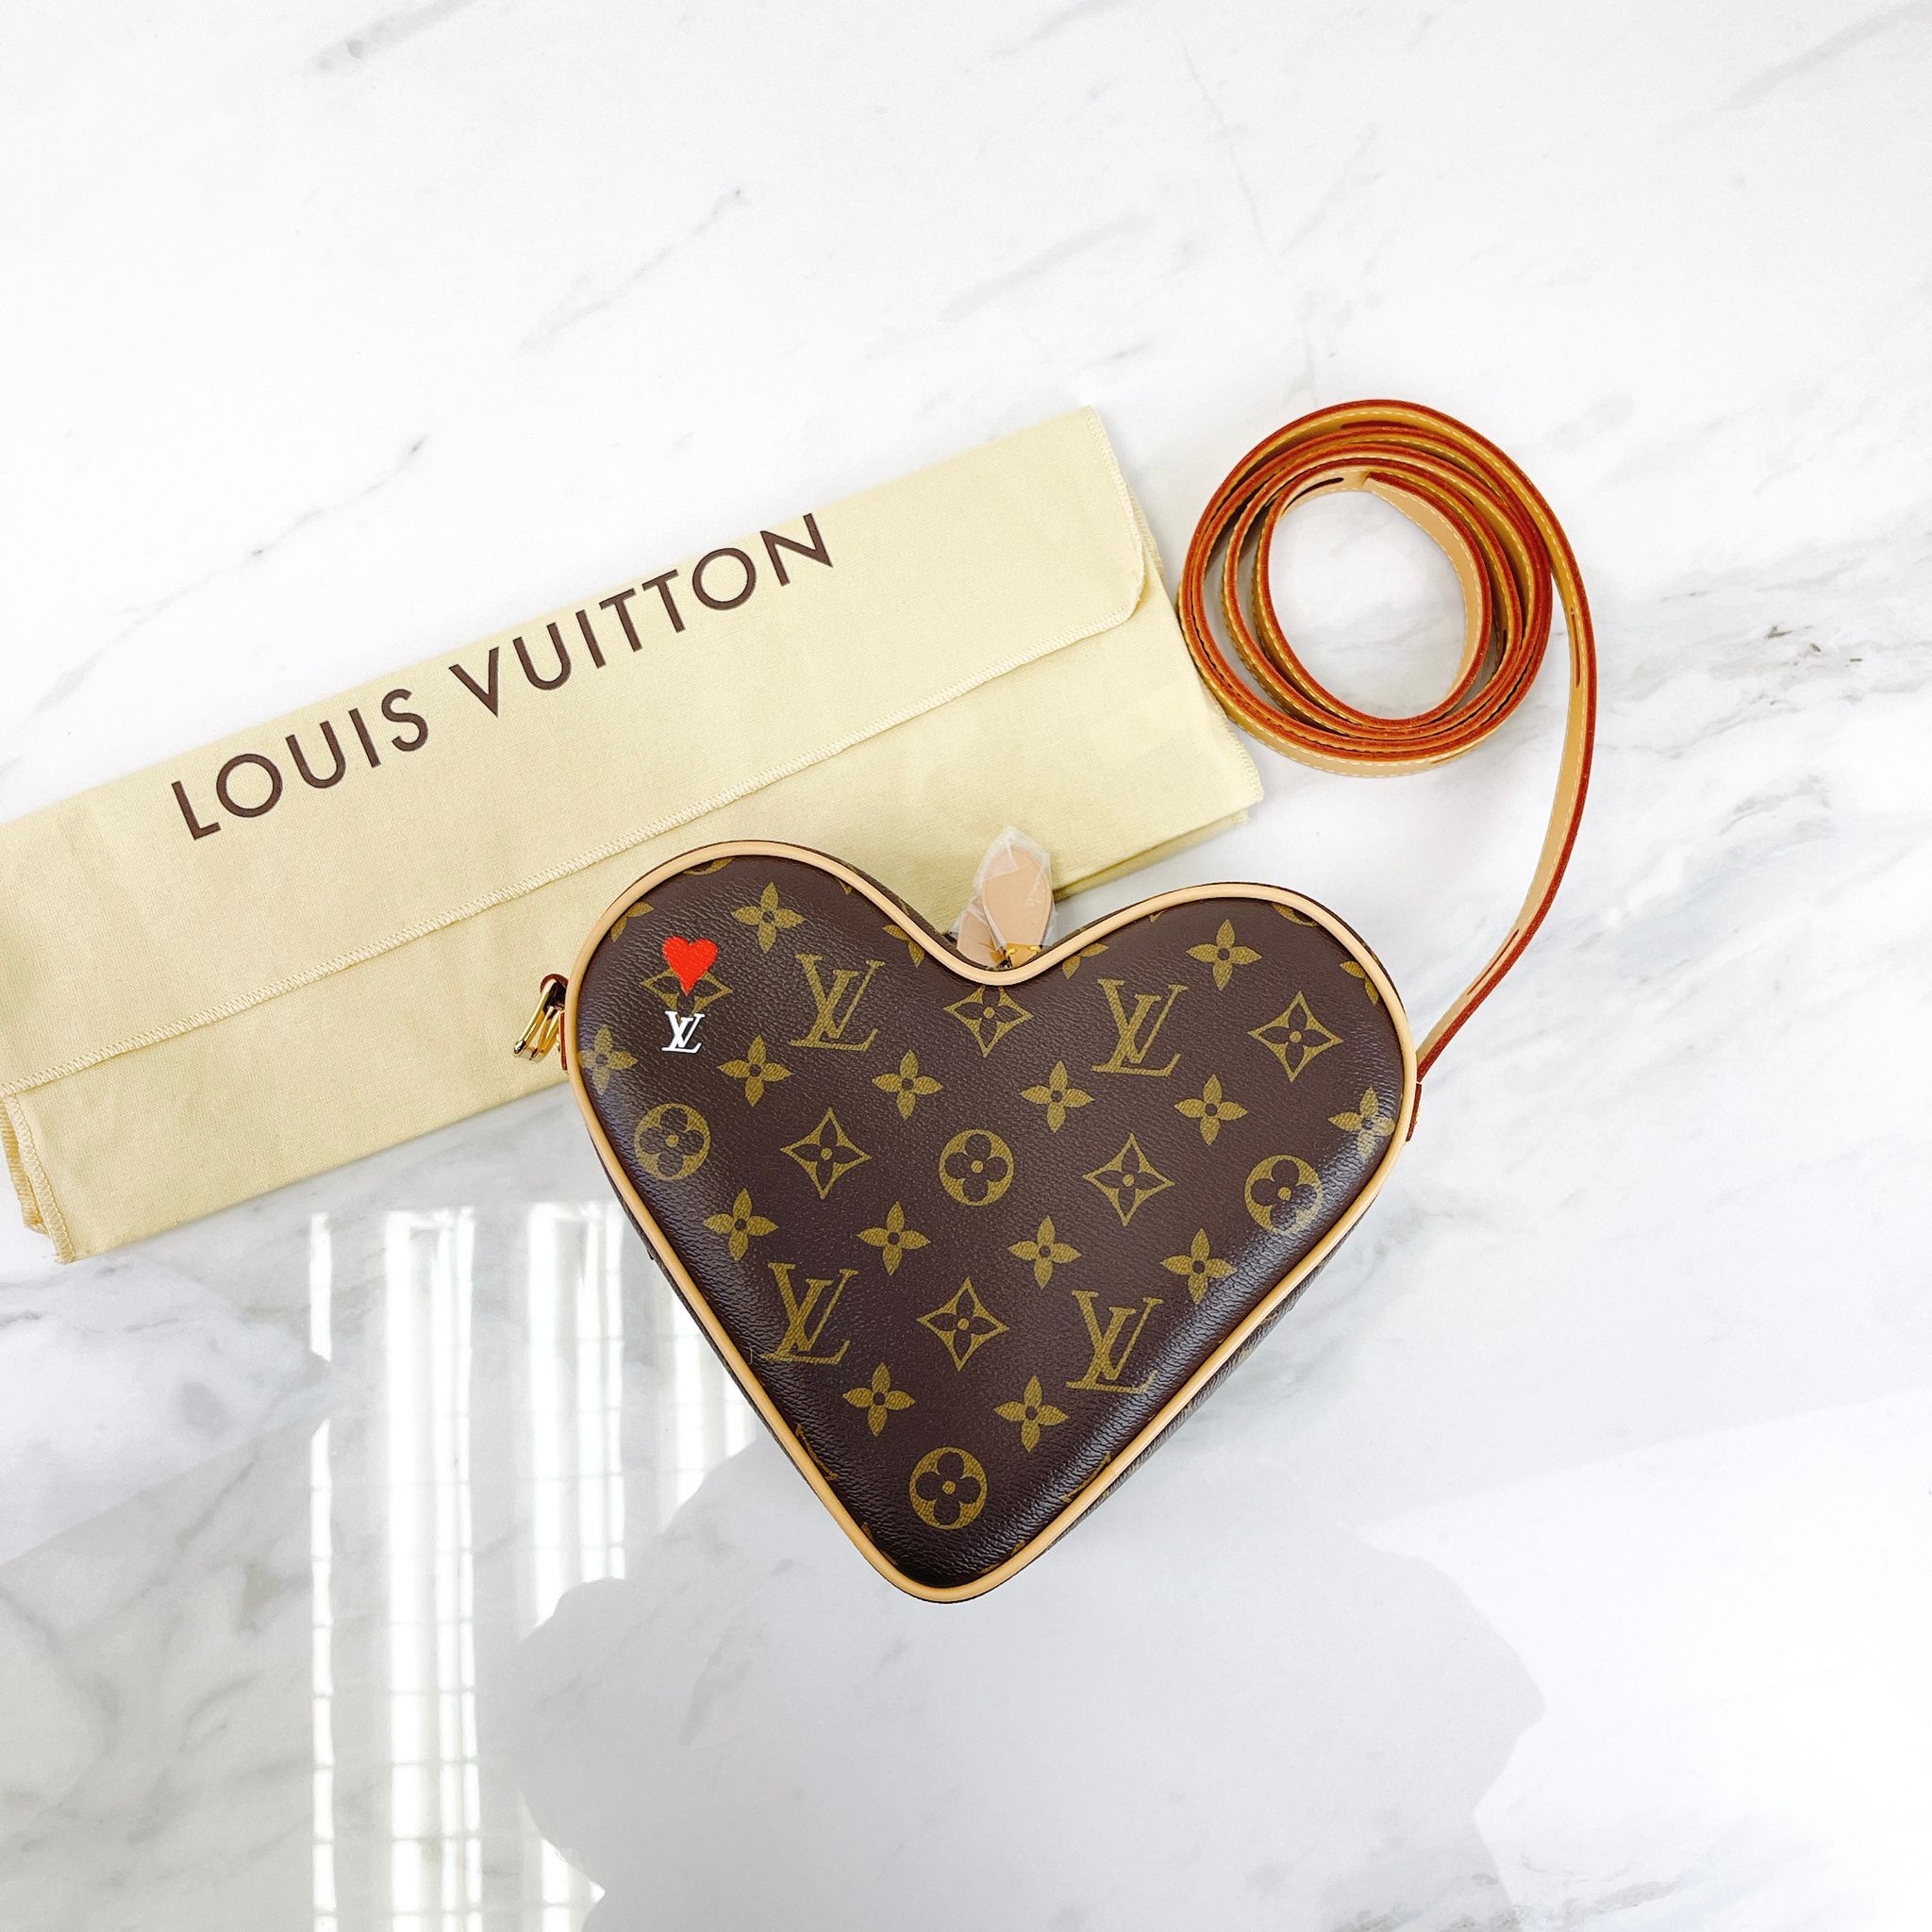 Unboxing Coeur, Heart Bag, Louis Vuitton, Hard to find Item, What fits